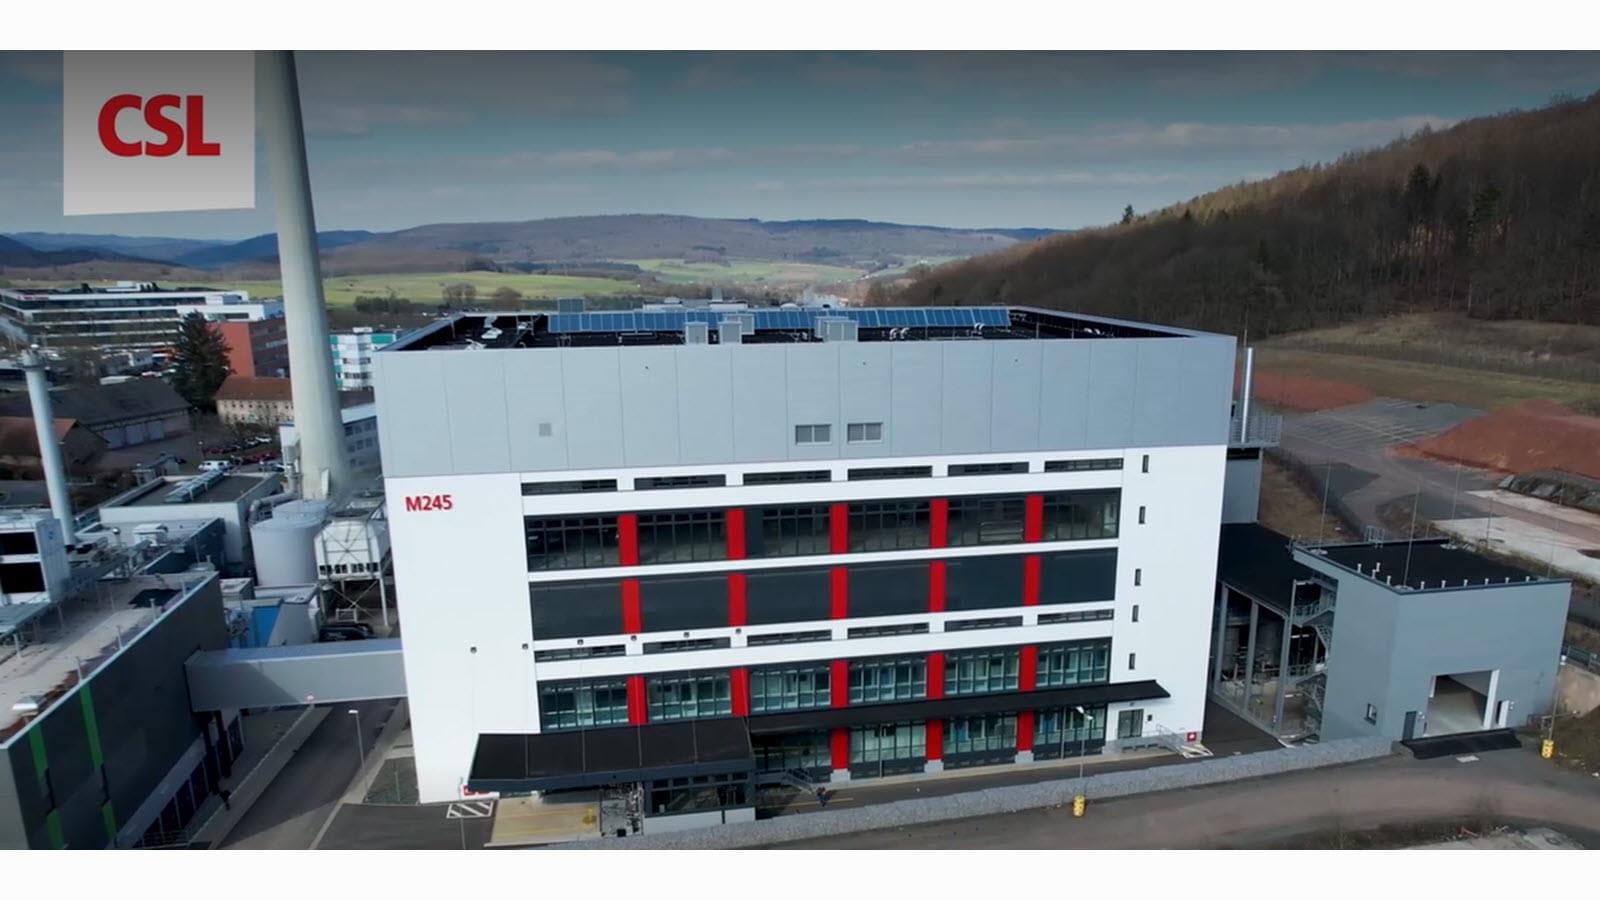 Aerial view of CSL Behring's new plasma fractionation facility in Marburg, Germany